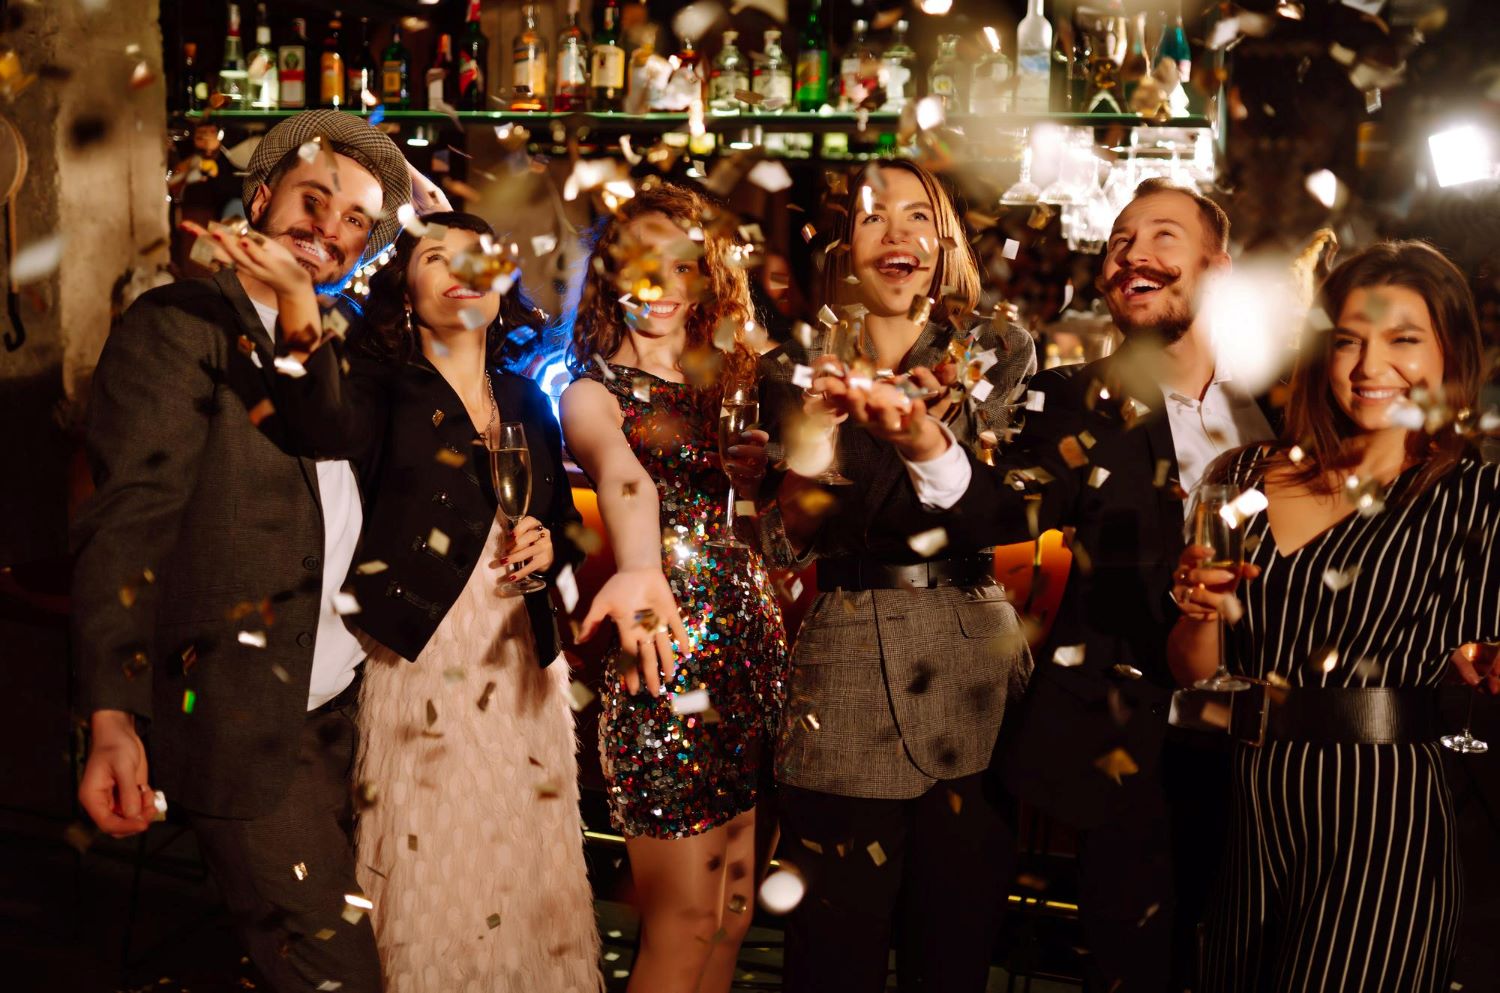 TOP TIPS FOR SMEs TO HOST THE BEST XMAS PARTY AND ENGAGE EMPLOYEES